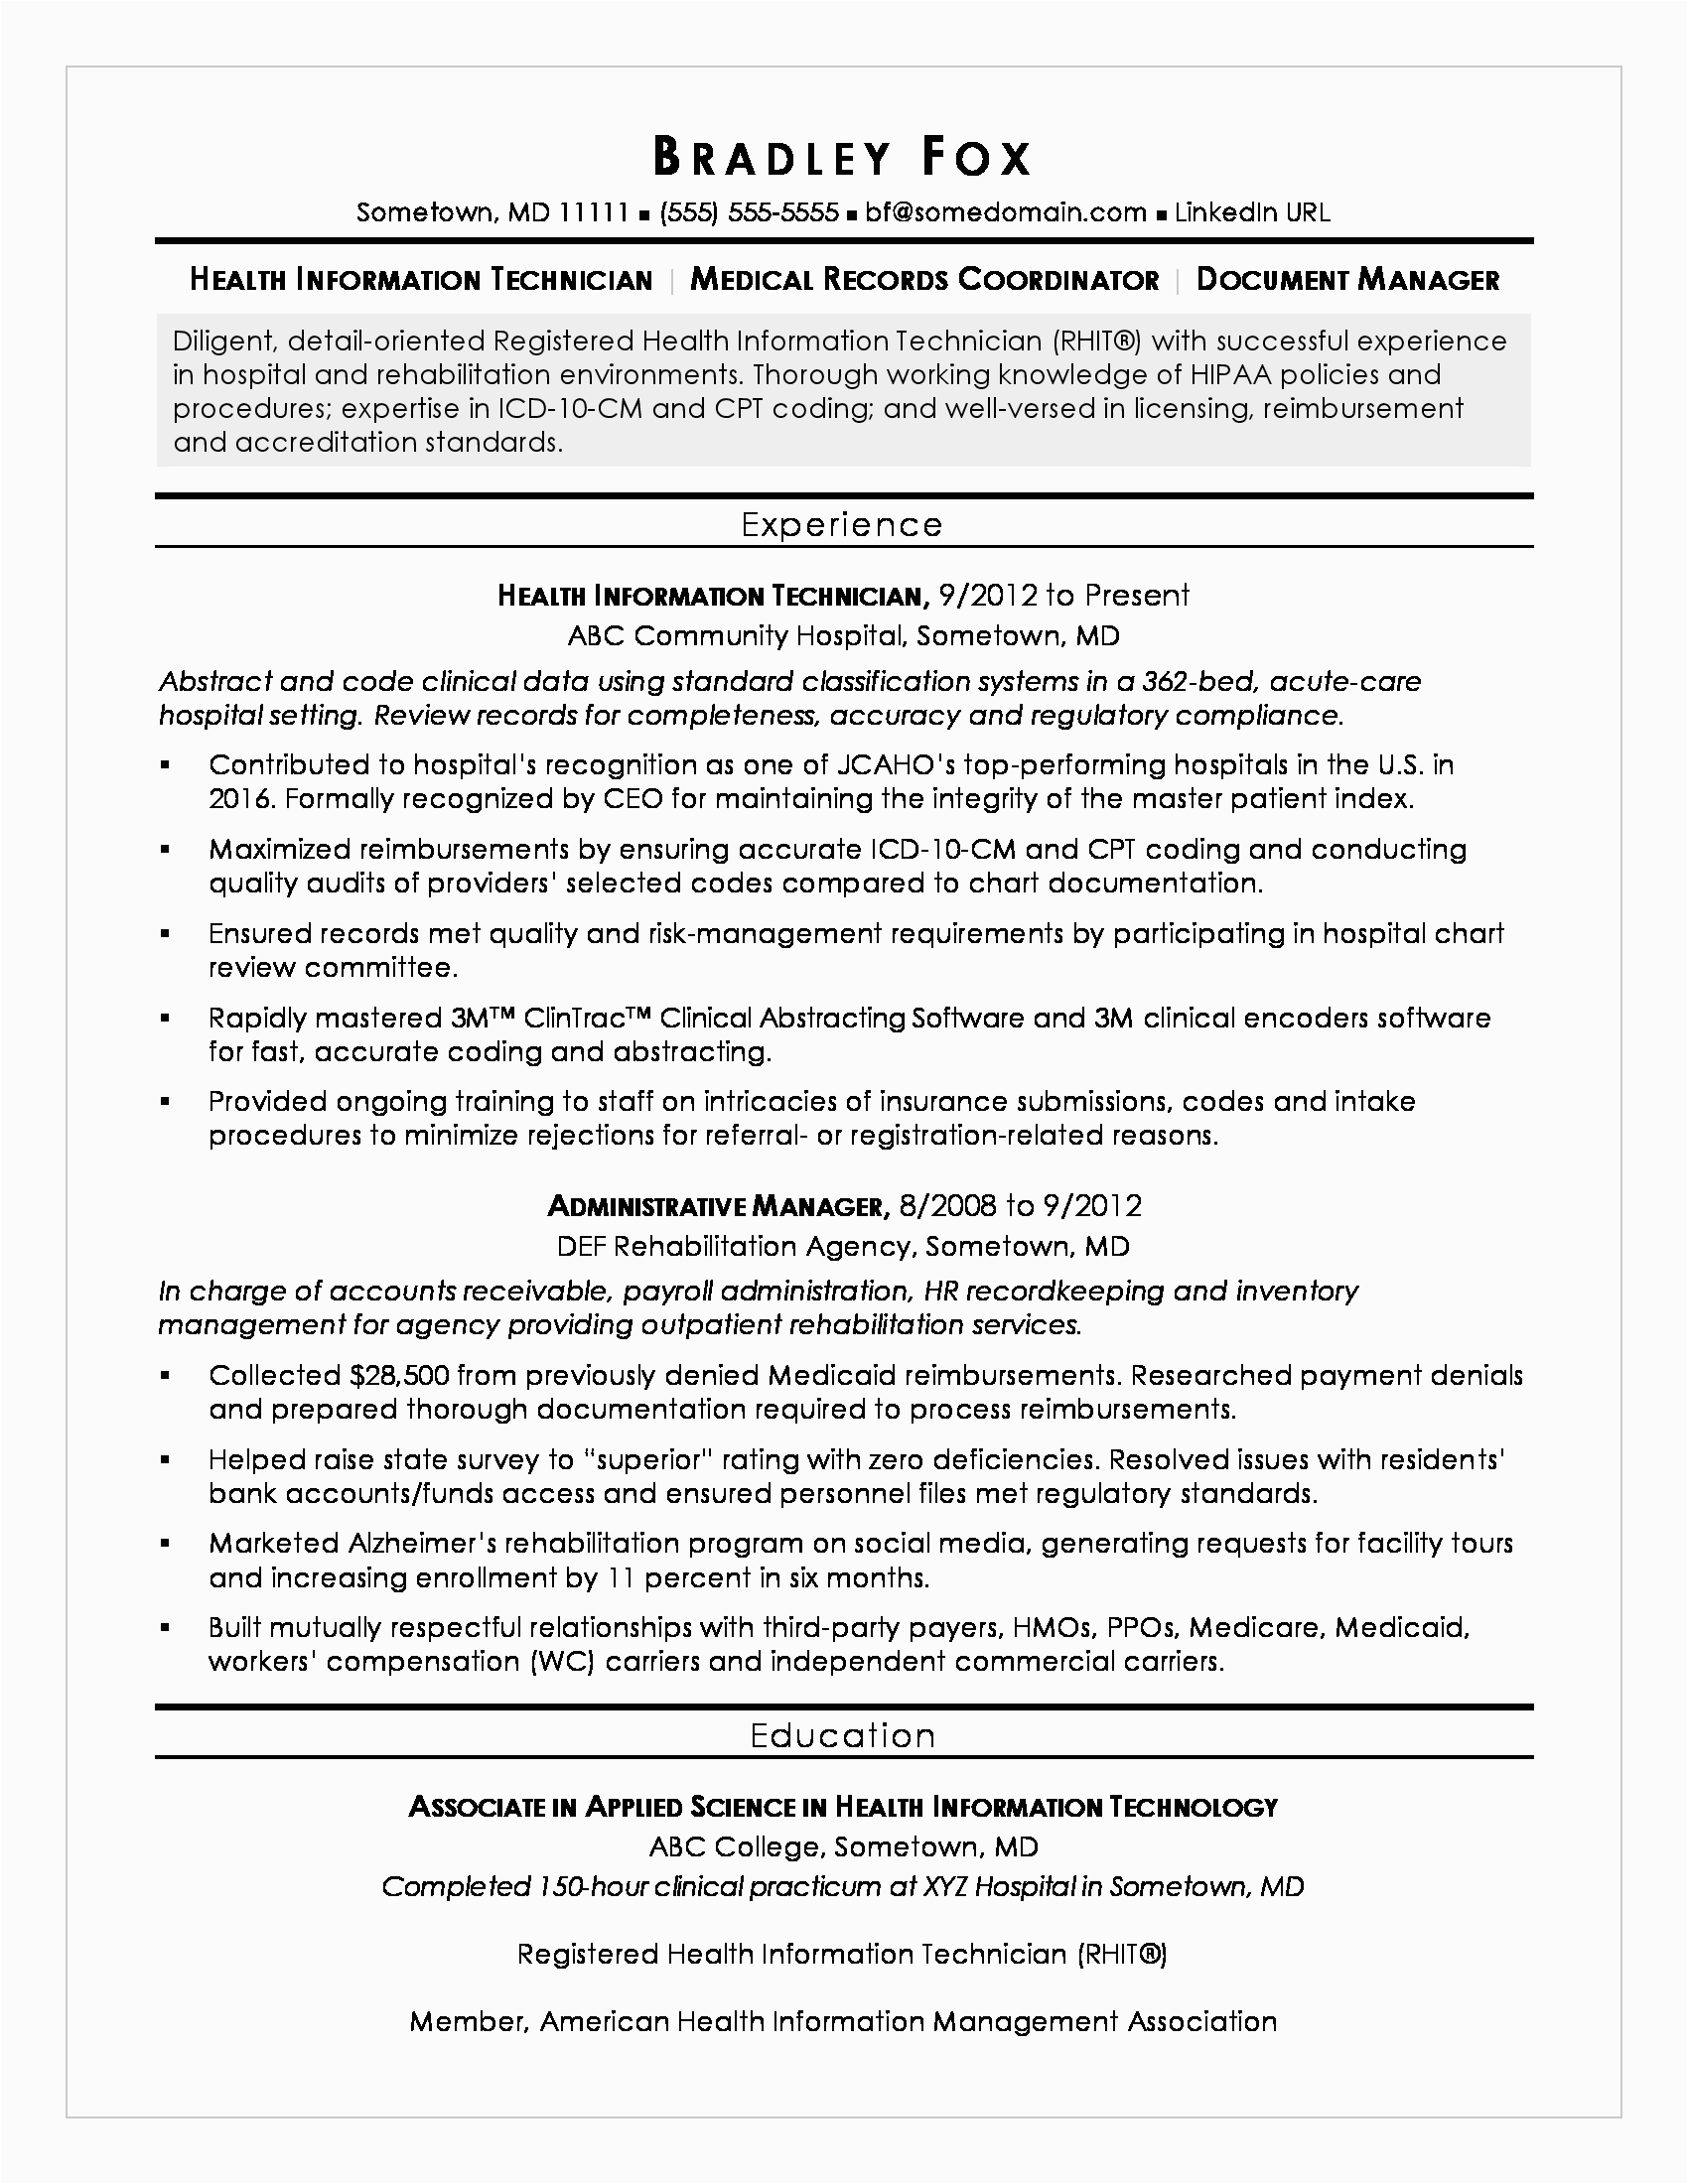 Sample Resume for A Healthcare It Professional Health Information Technician Sample Resume